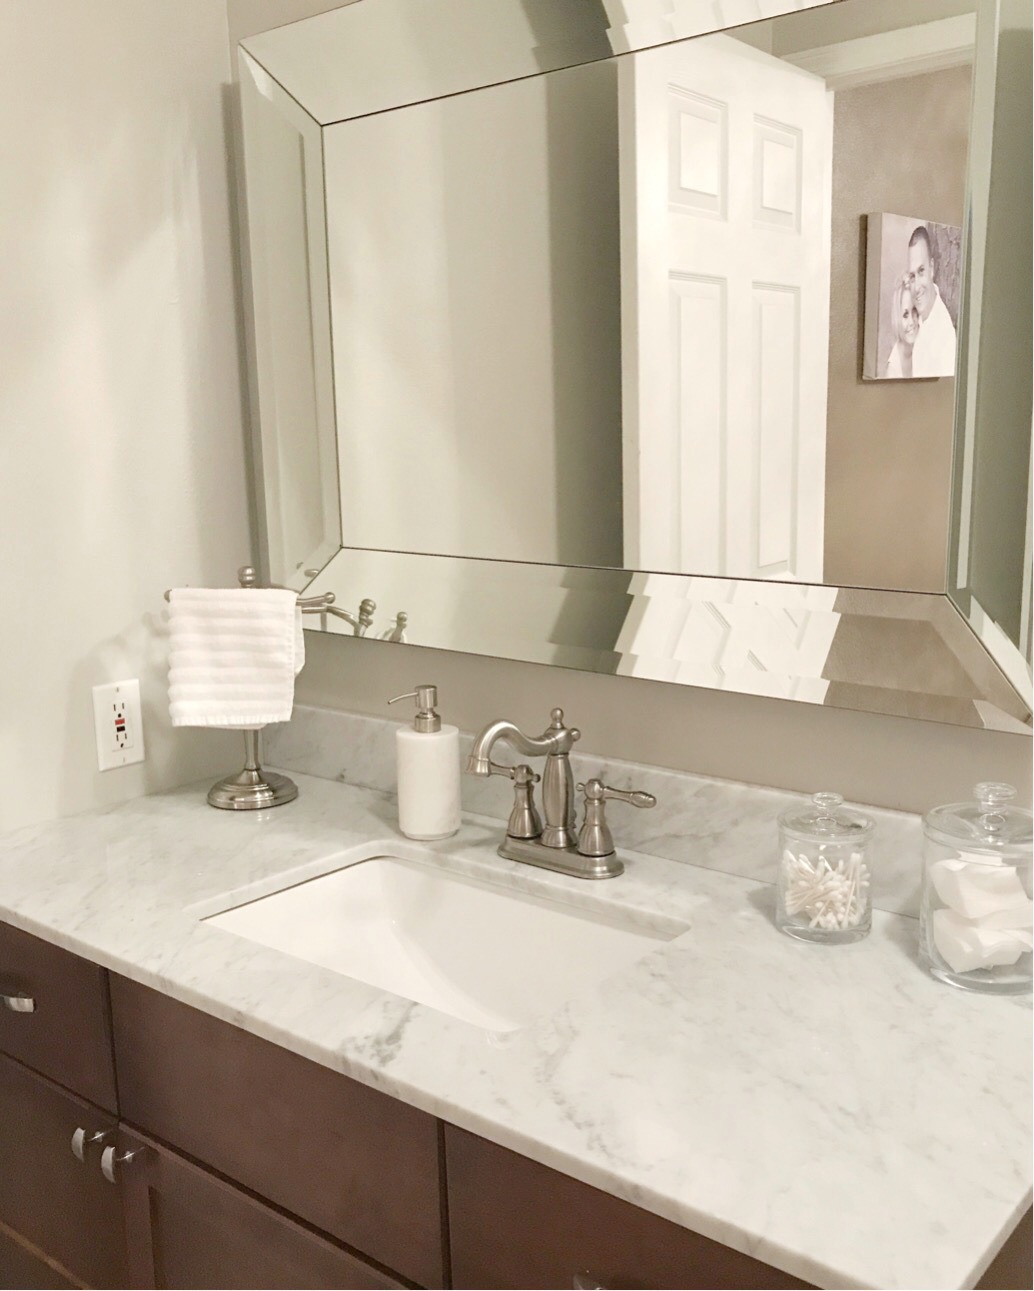 Small Master Bath ideas - Sherwin Williams Repose Gray. Create a spa like feeling in your own bathroom. A Cup Full of Sass